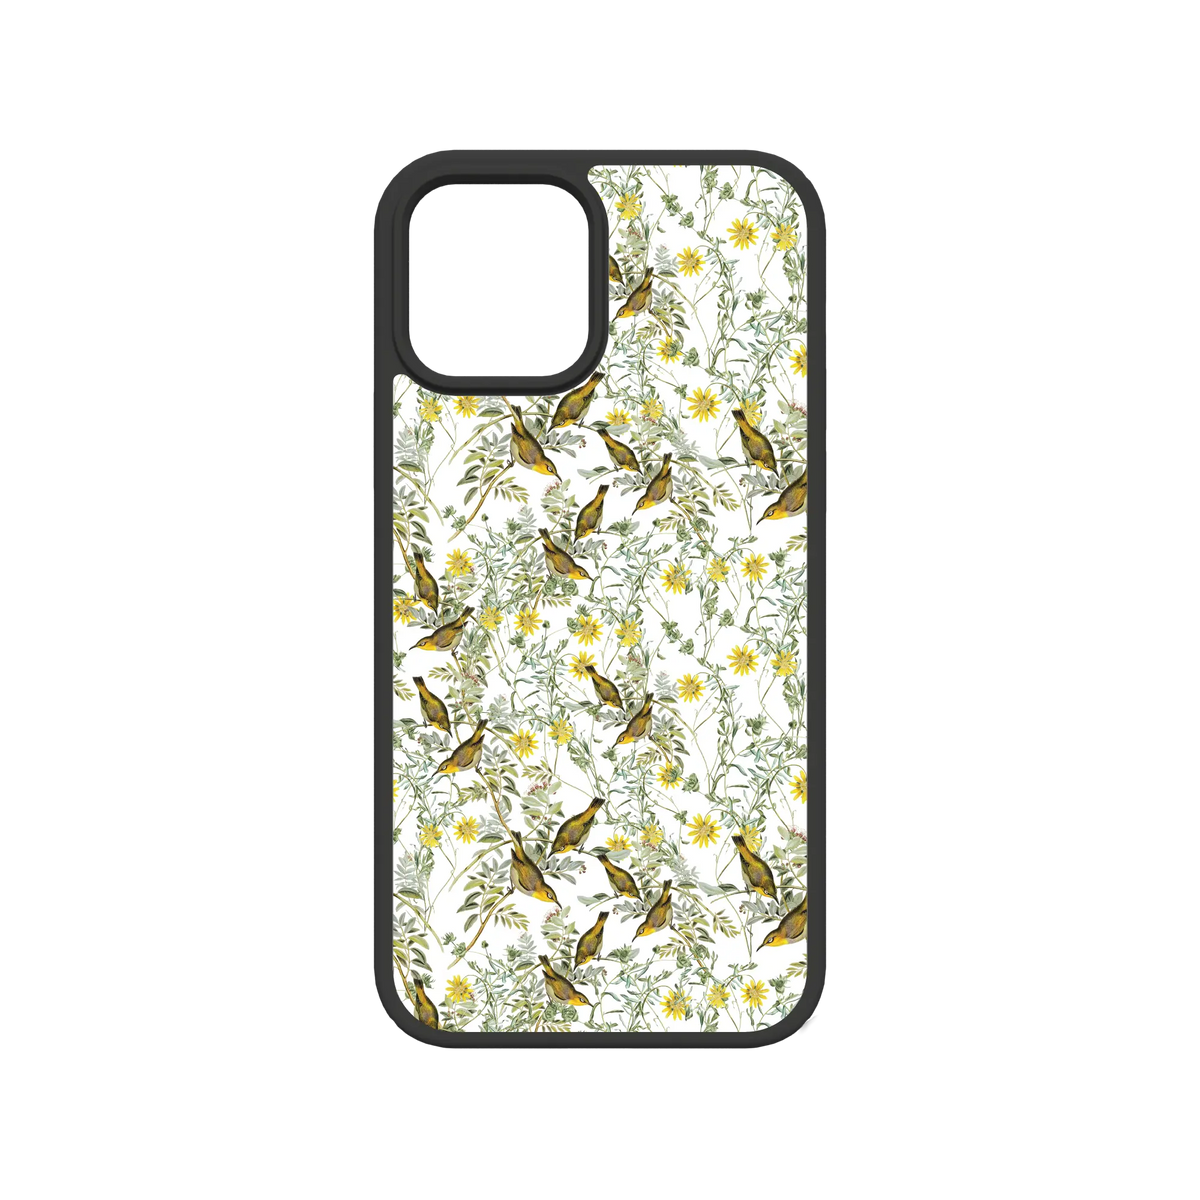 Apple-iPhone-12-12-Pro-Crystal-Clear Nashville Warbler | Protective MagSafe Case | Birds and Bees Series for Apple iPhone 12 Series cellhelmet cellhelmet